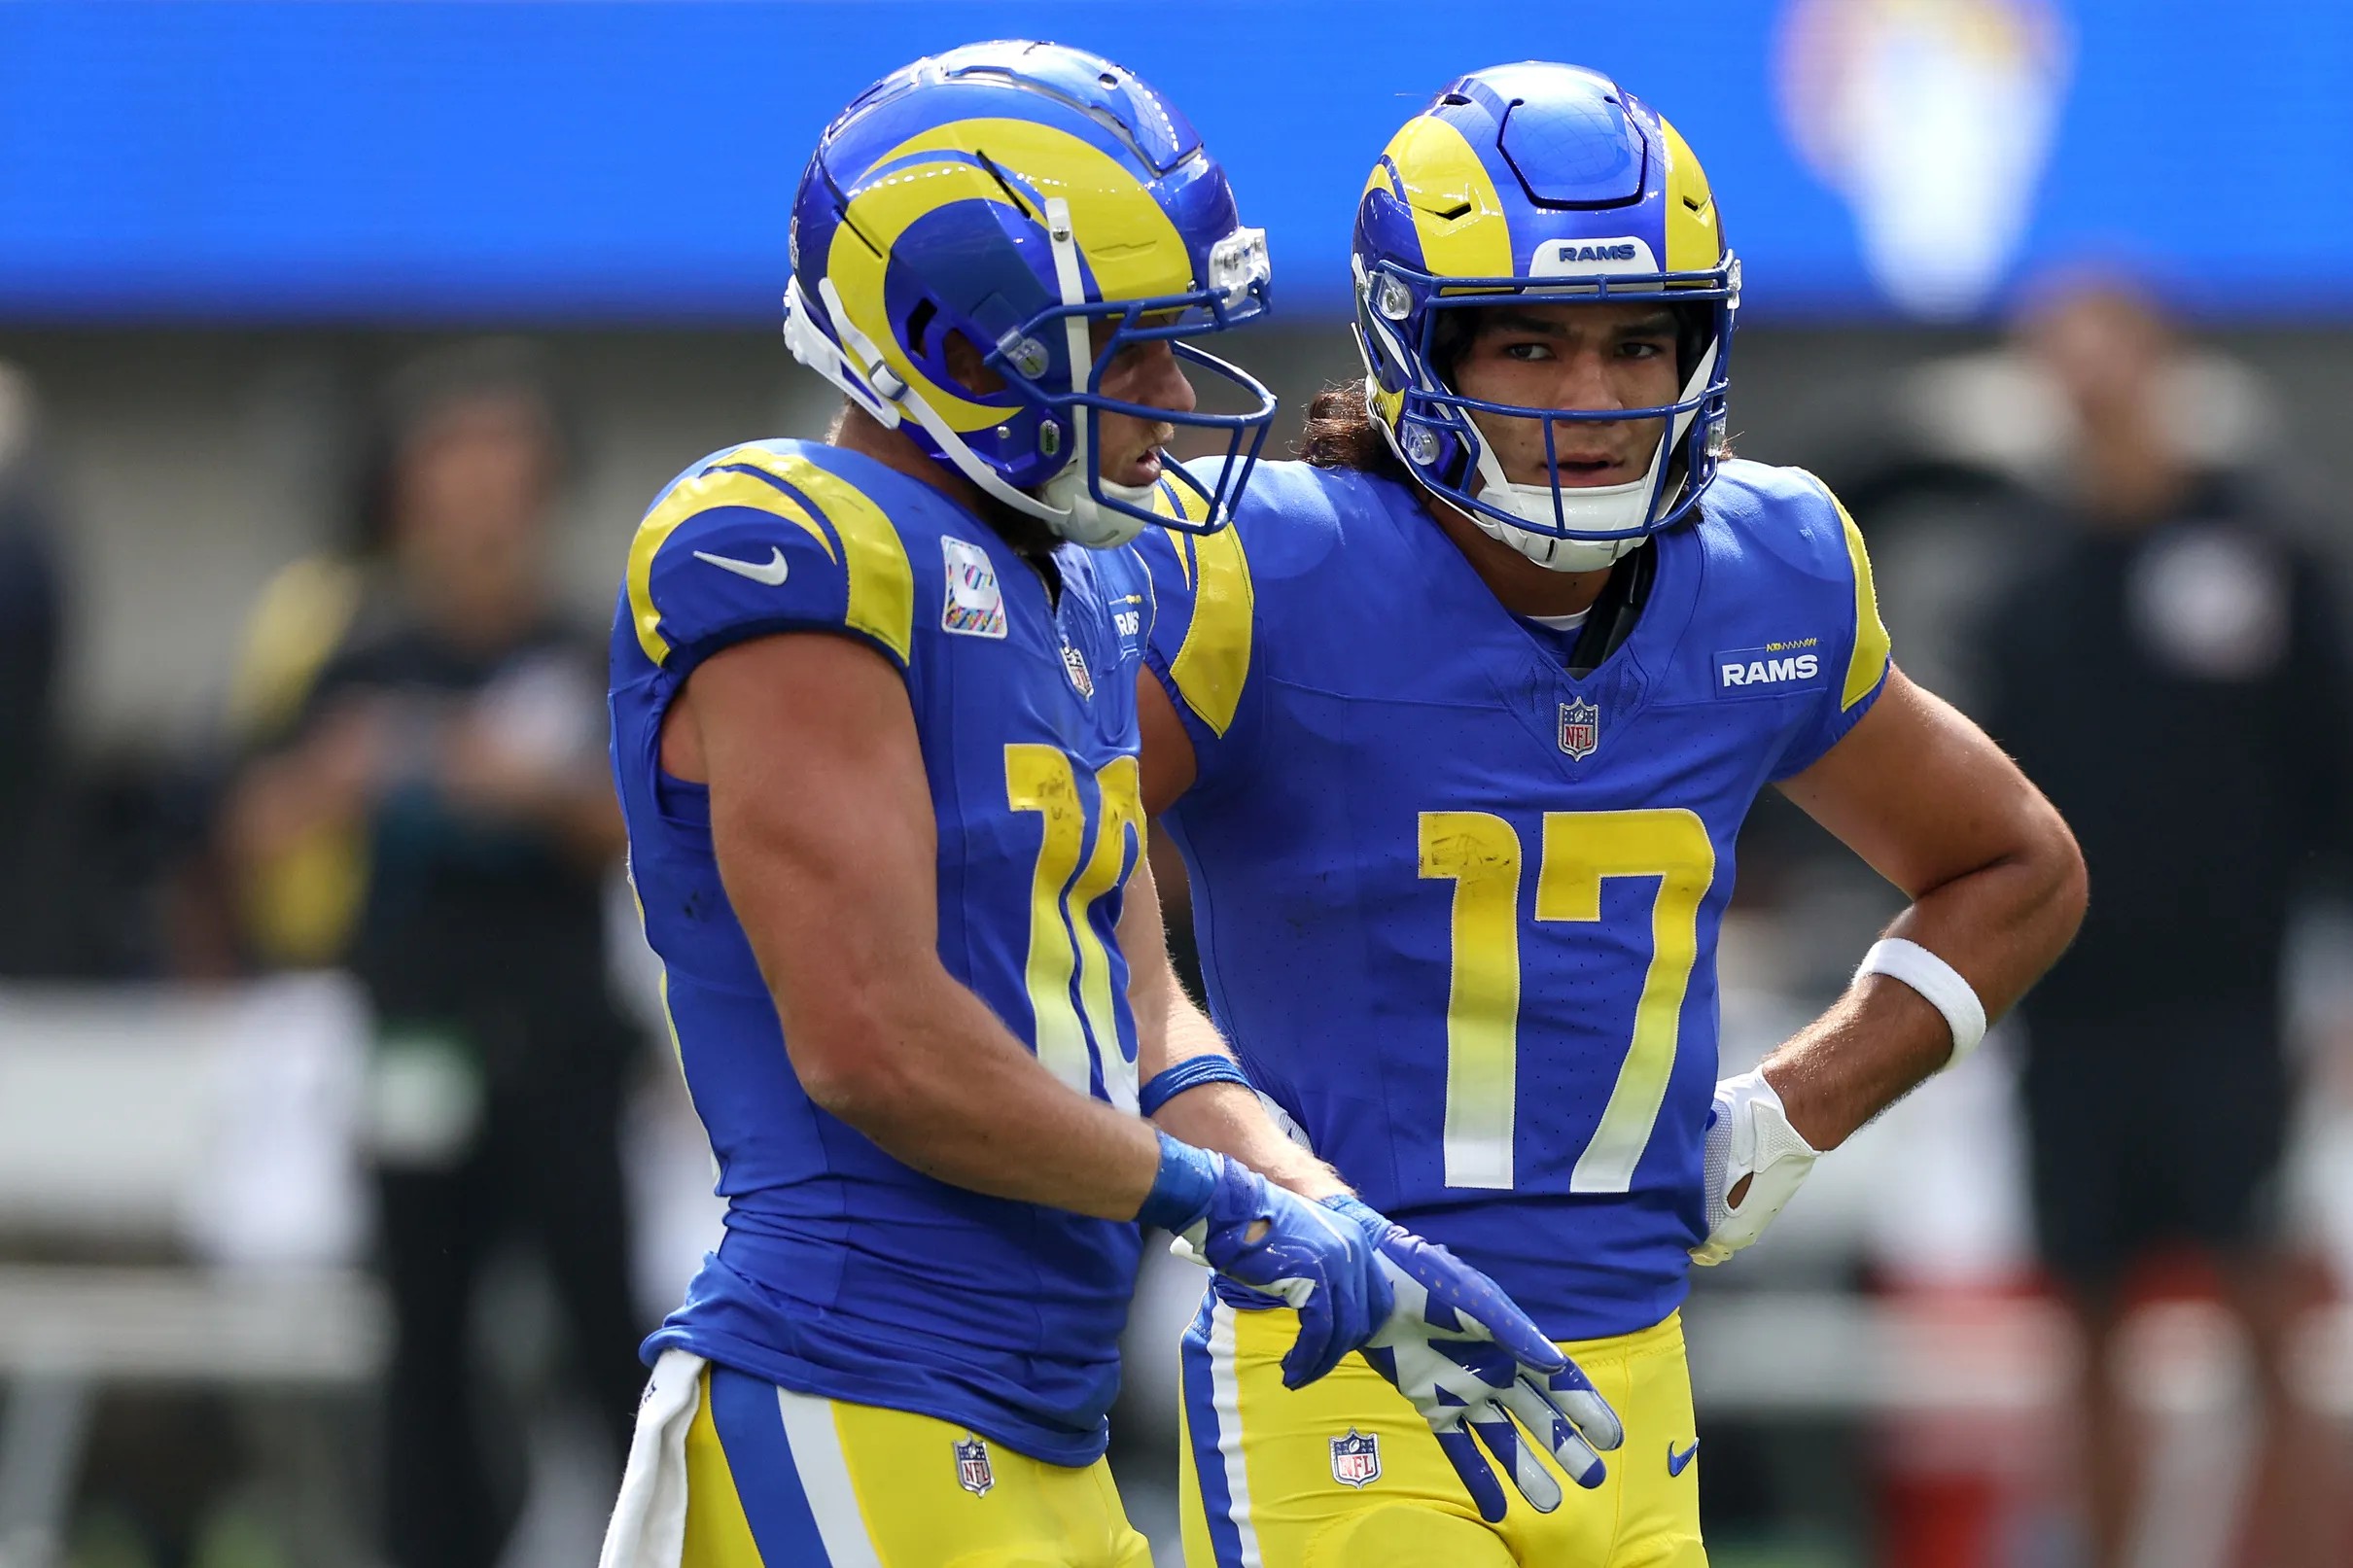 Rams News: NFC West still NFL's top division - Turf Show Times